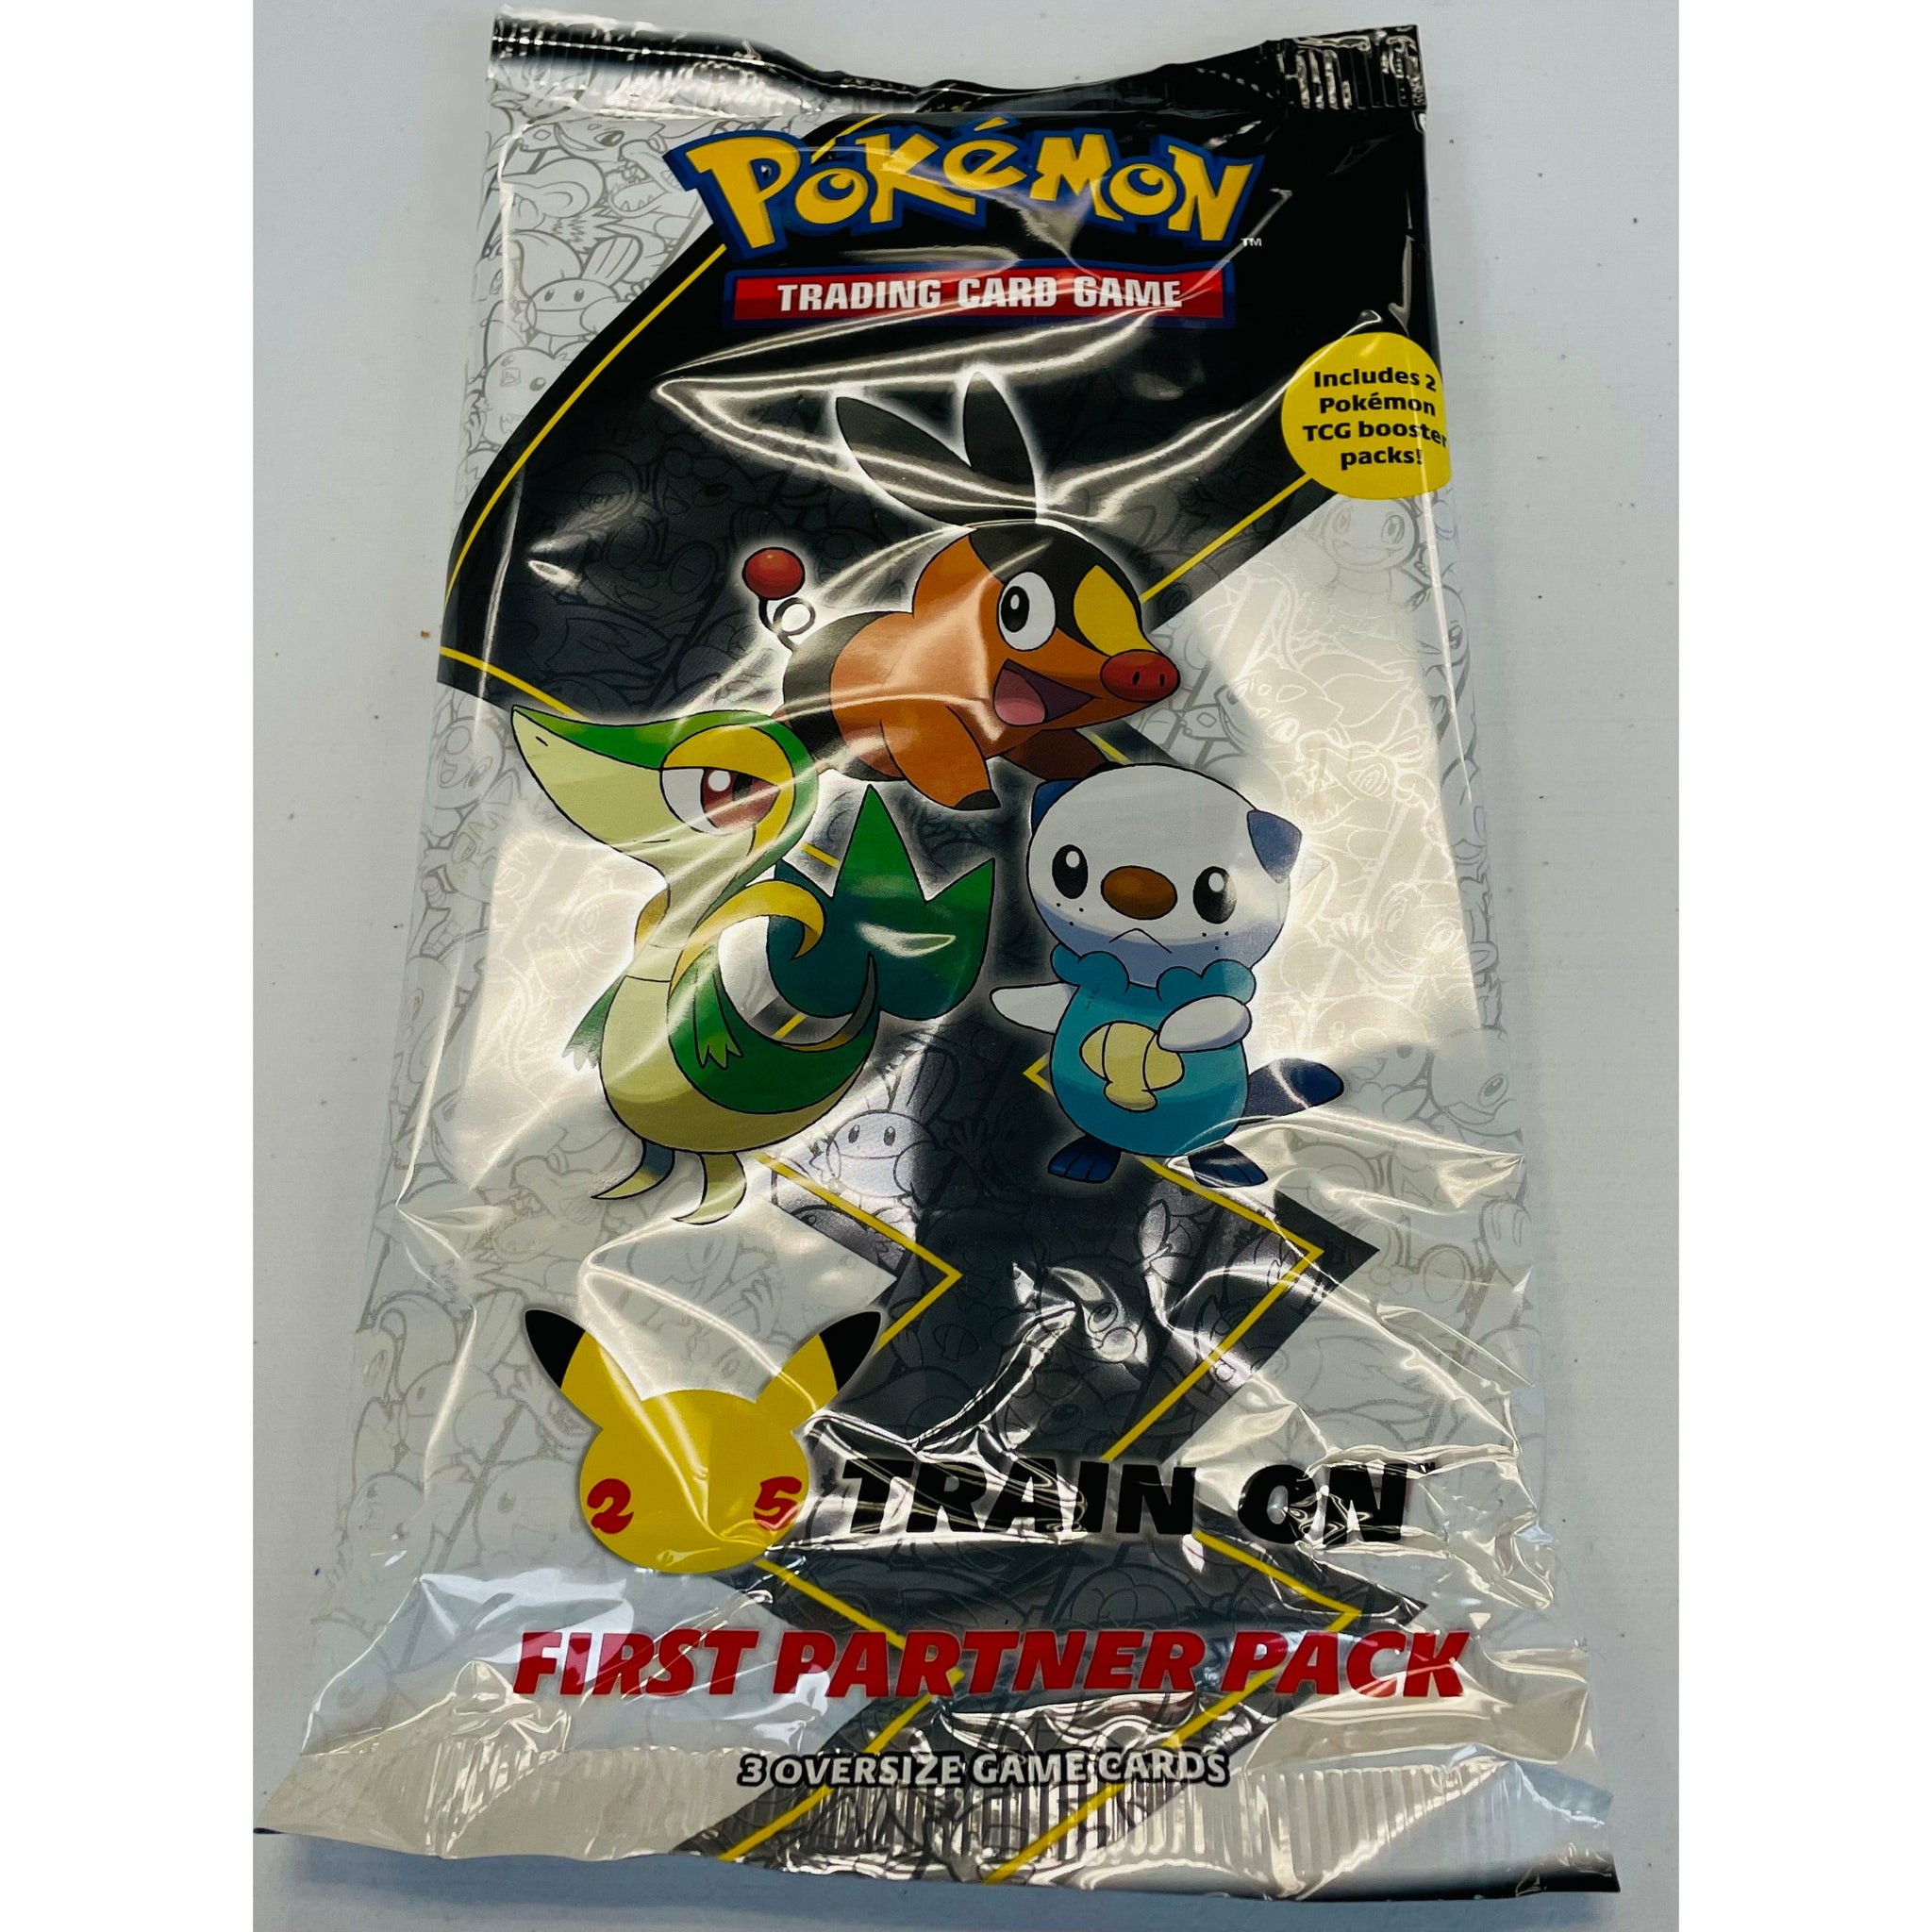 Pokemon First Partner Pack UNOVA Region New Sealed Includes 2 TCG Booster Packs